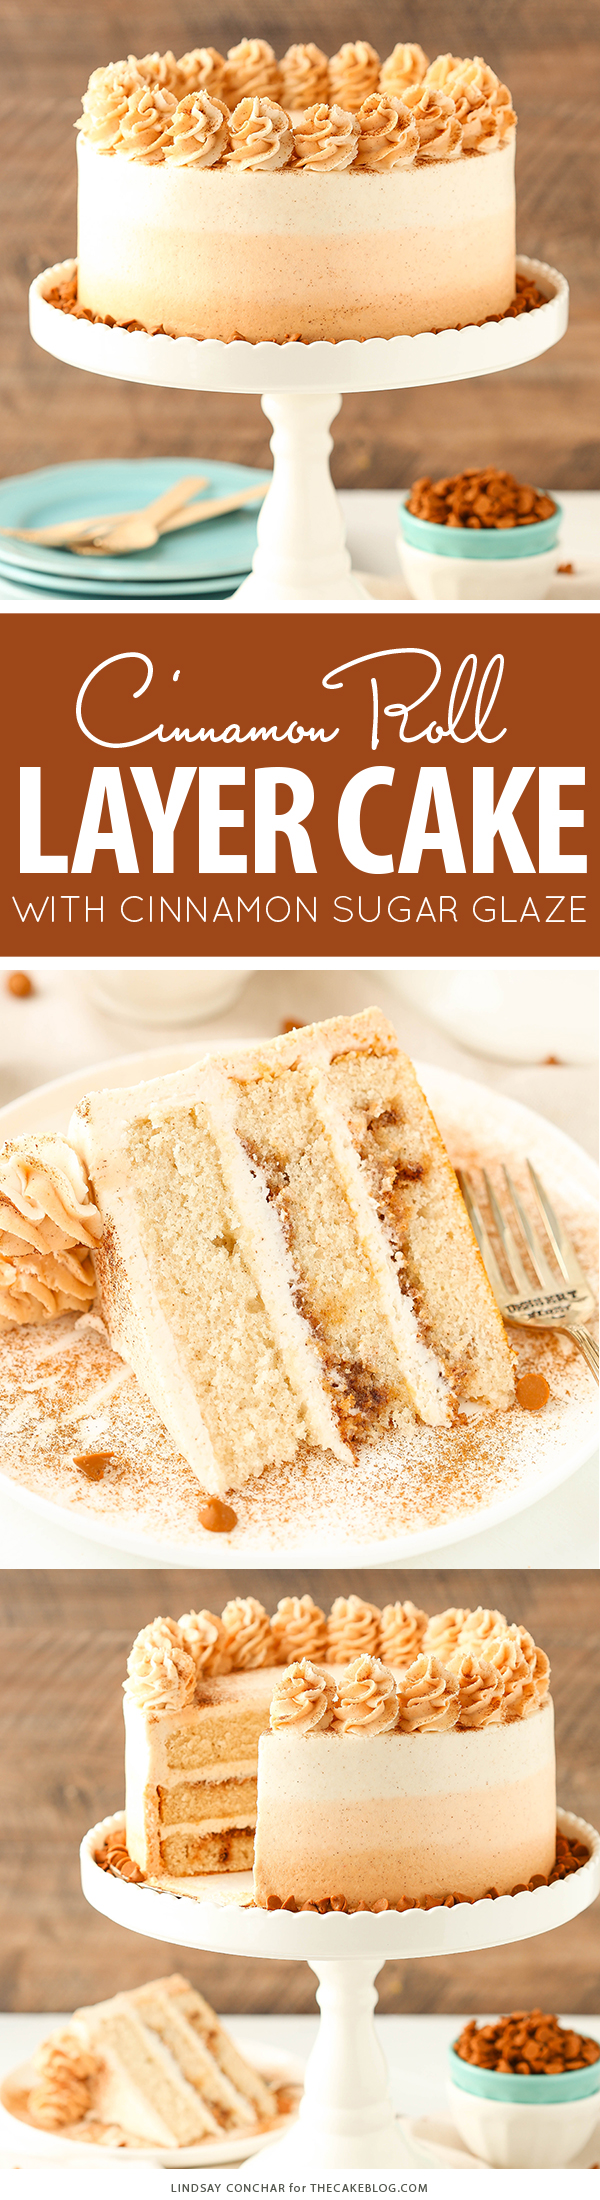 Cinnamon Roll Layer Cake | by Lindsay Conchar for TheCakeBlog.com